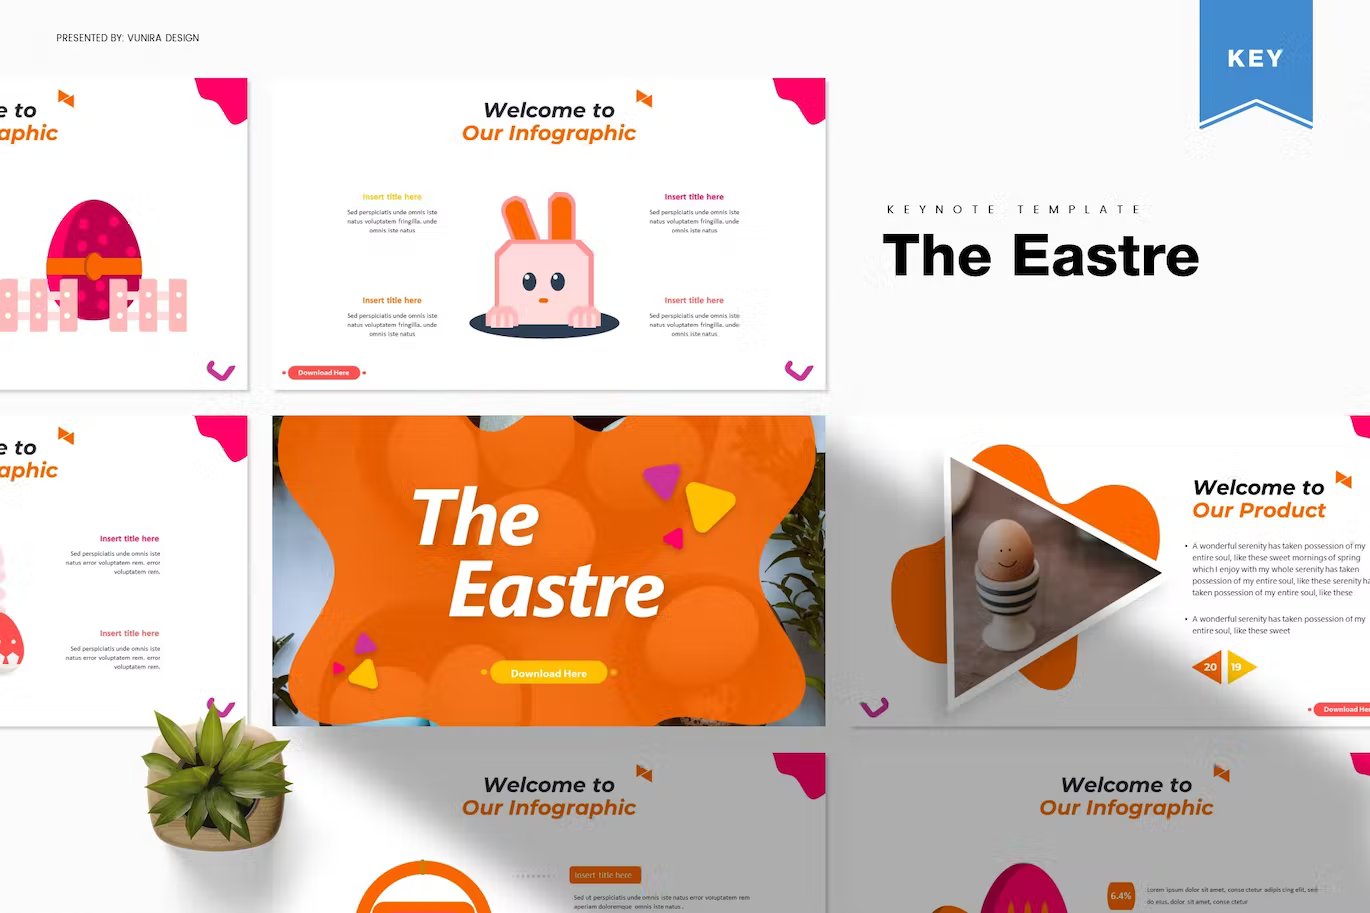 Black lettering "The Eastre Keynote Template" and different the easter keynote templates in orange, white, dark gray, yellow and pink on a white background.